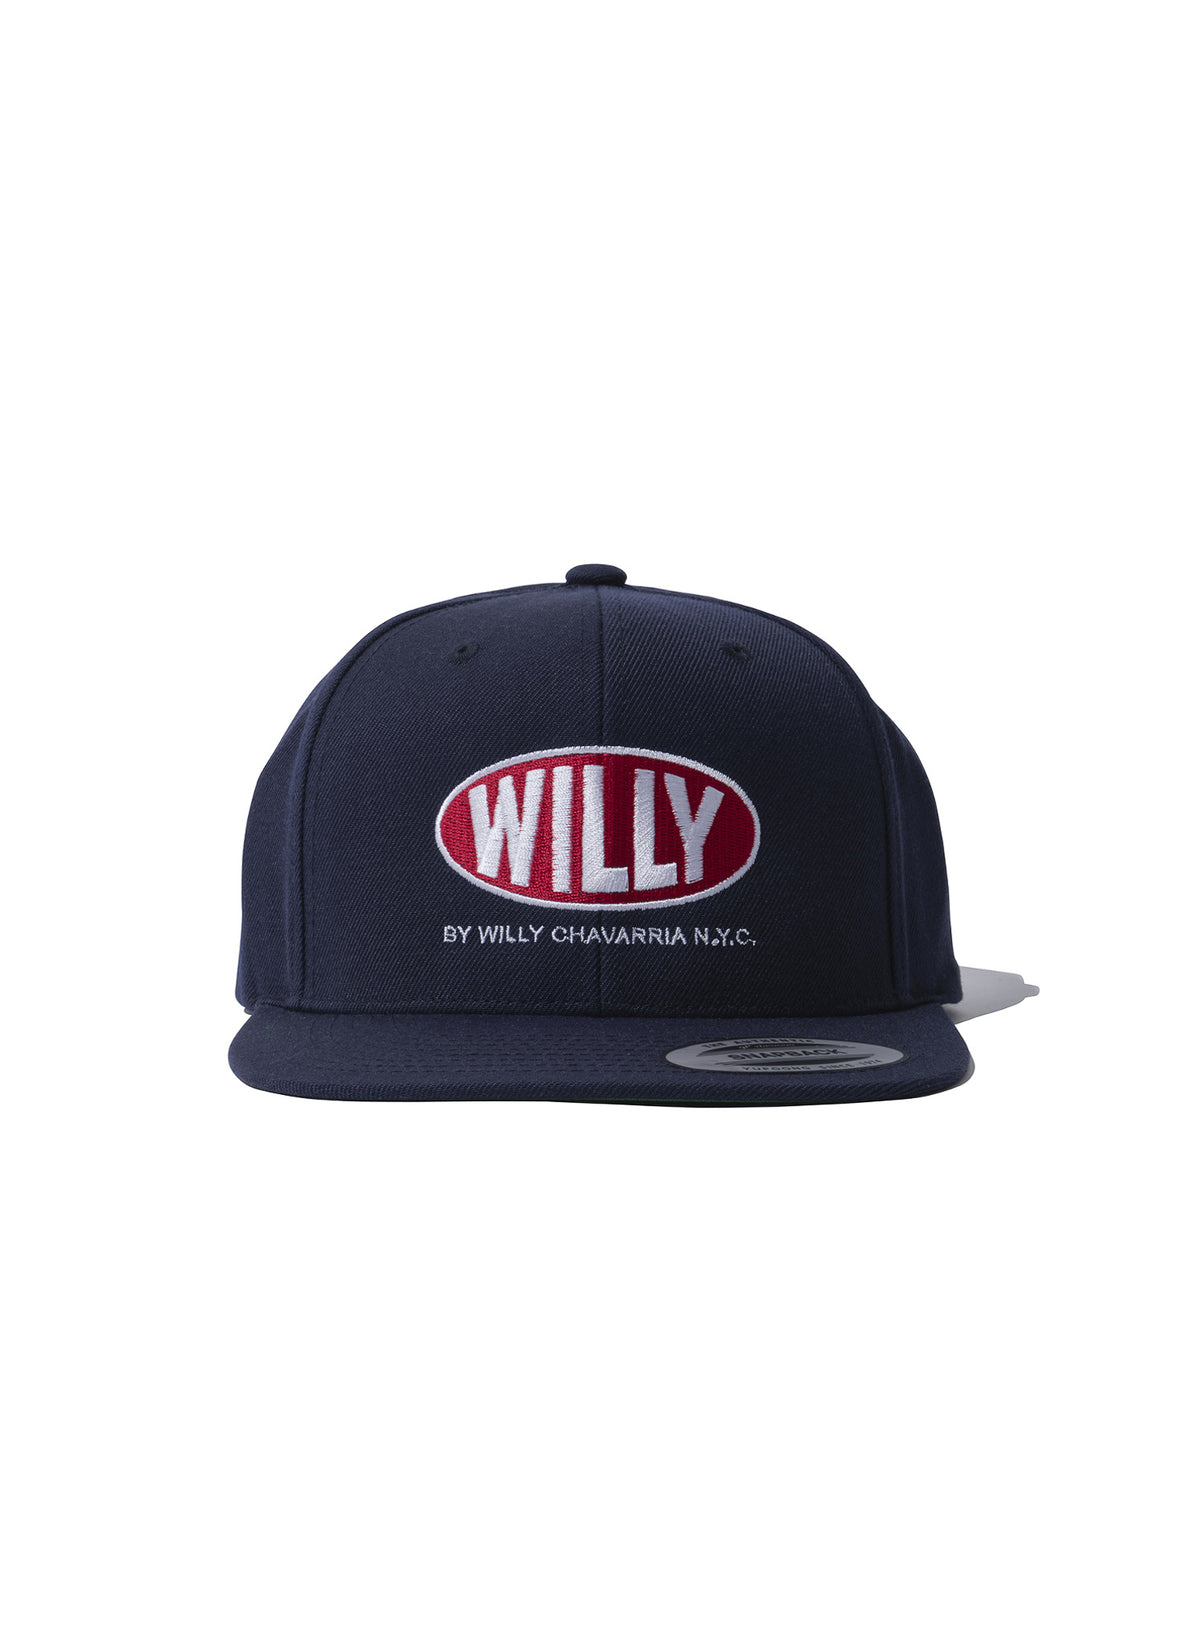 <span style="color: #f50b0b;">Last One</span> WILLY CHAVARRIA / WILLY LOGO CAP 1 DARK NAVY